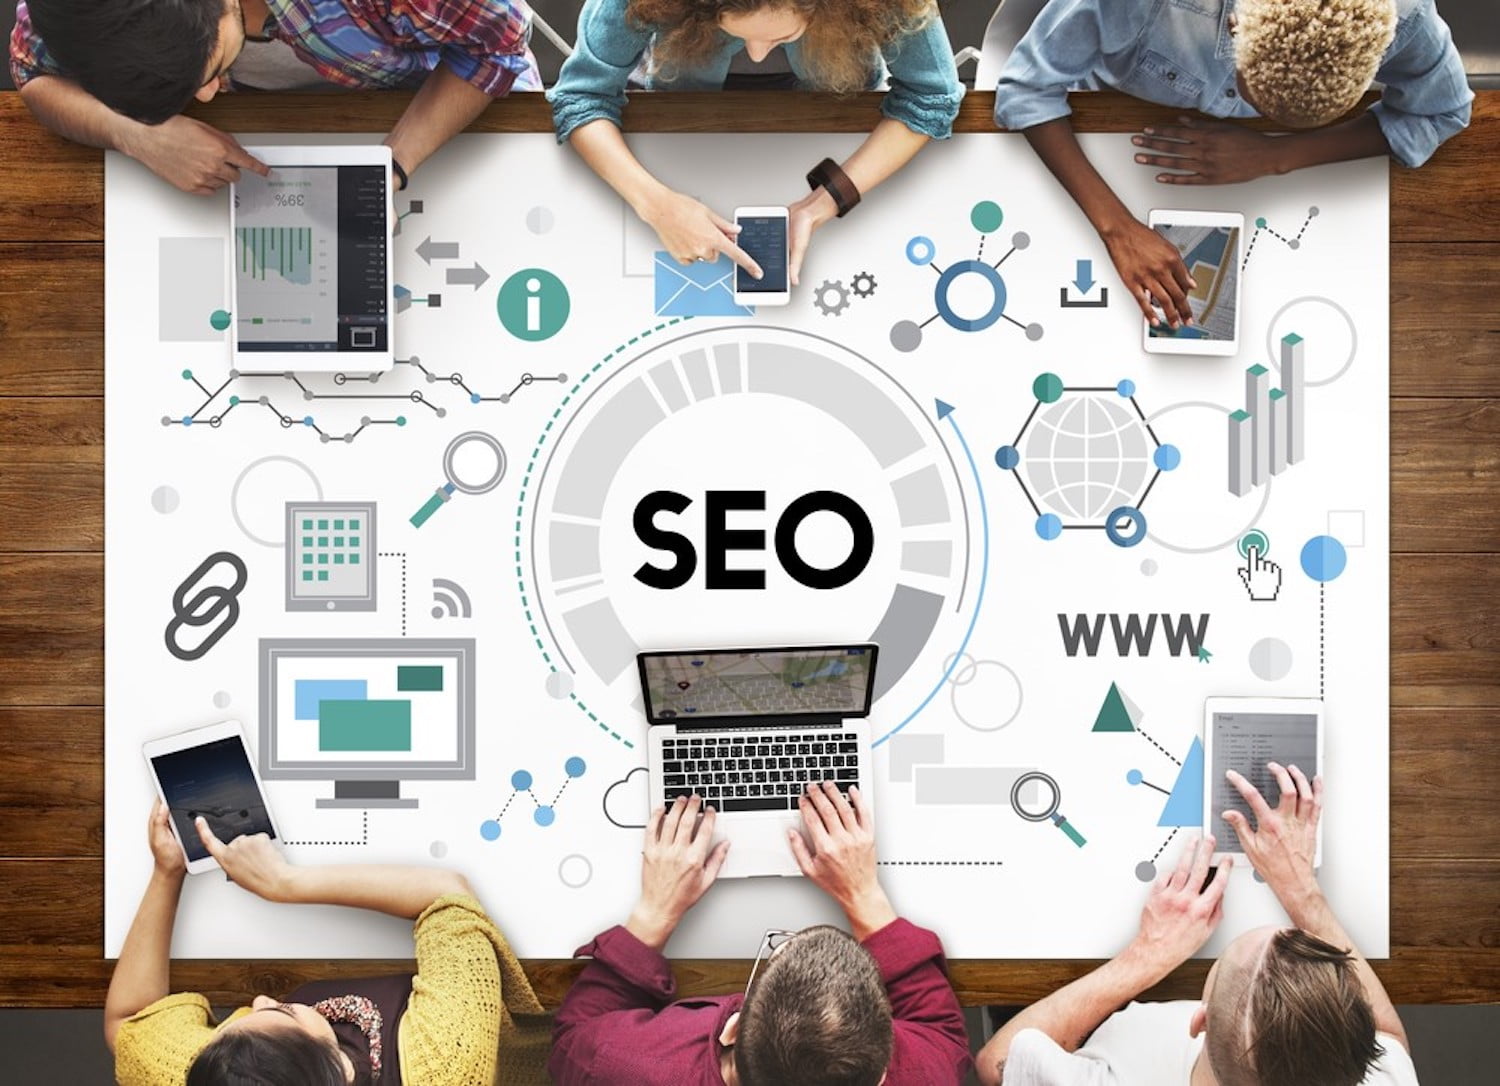 Featured image for “How to Keep up with SEO Trends and Changes”